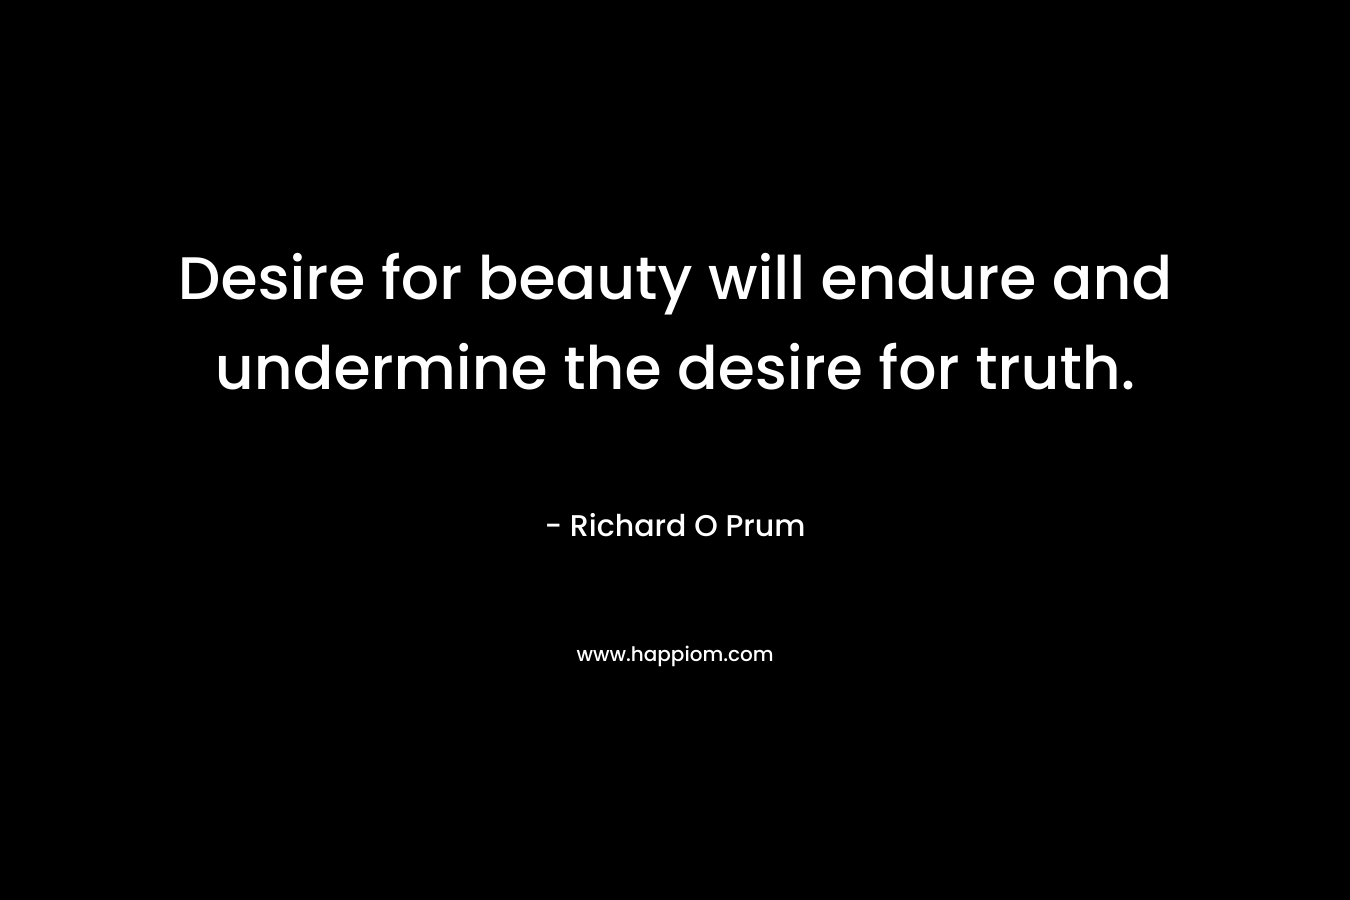 Desire for beauty will endure and undermine the desire for truth.